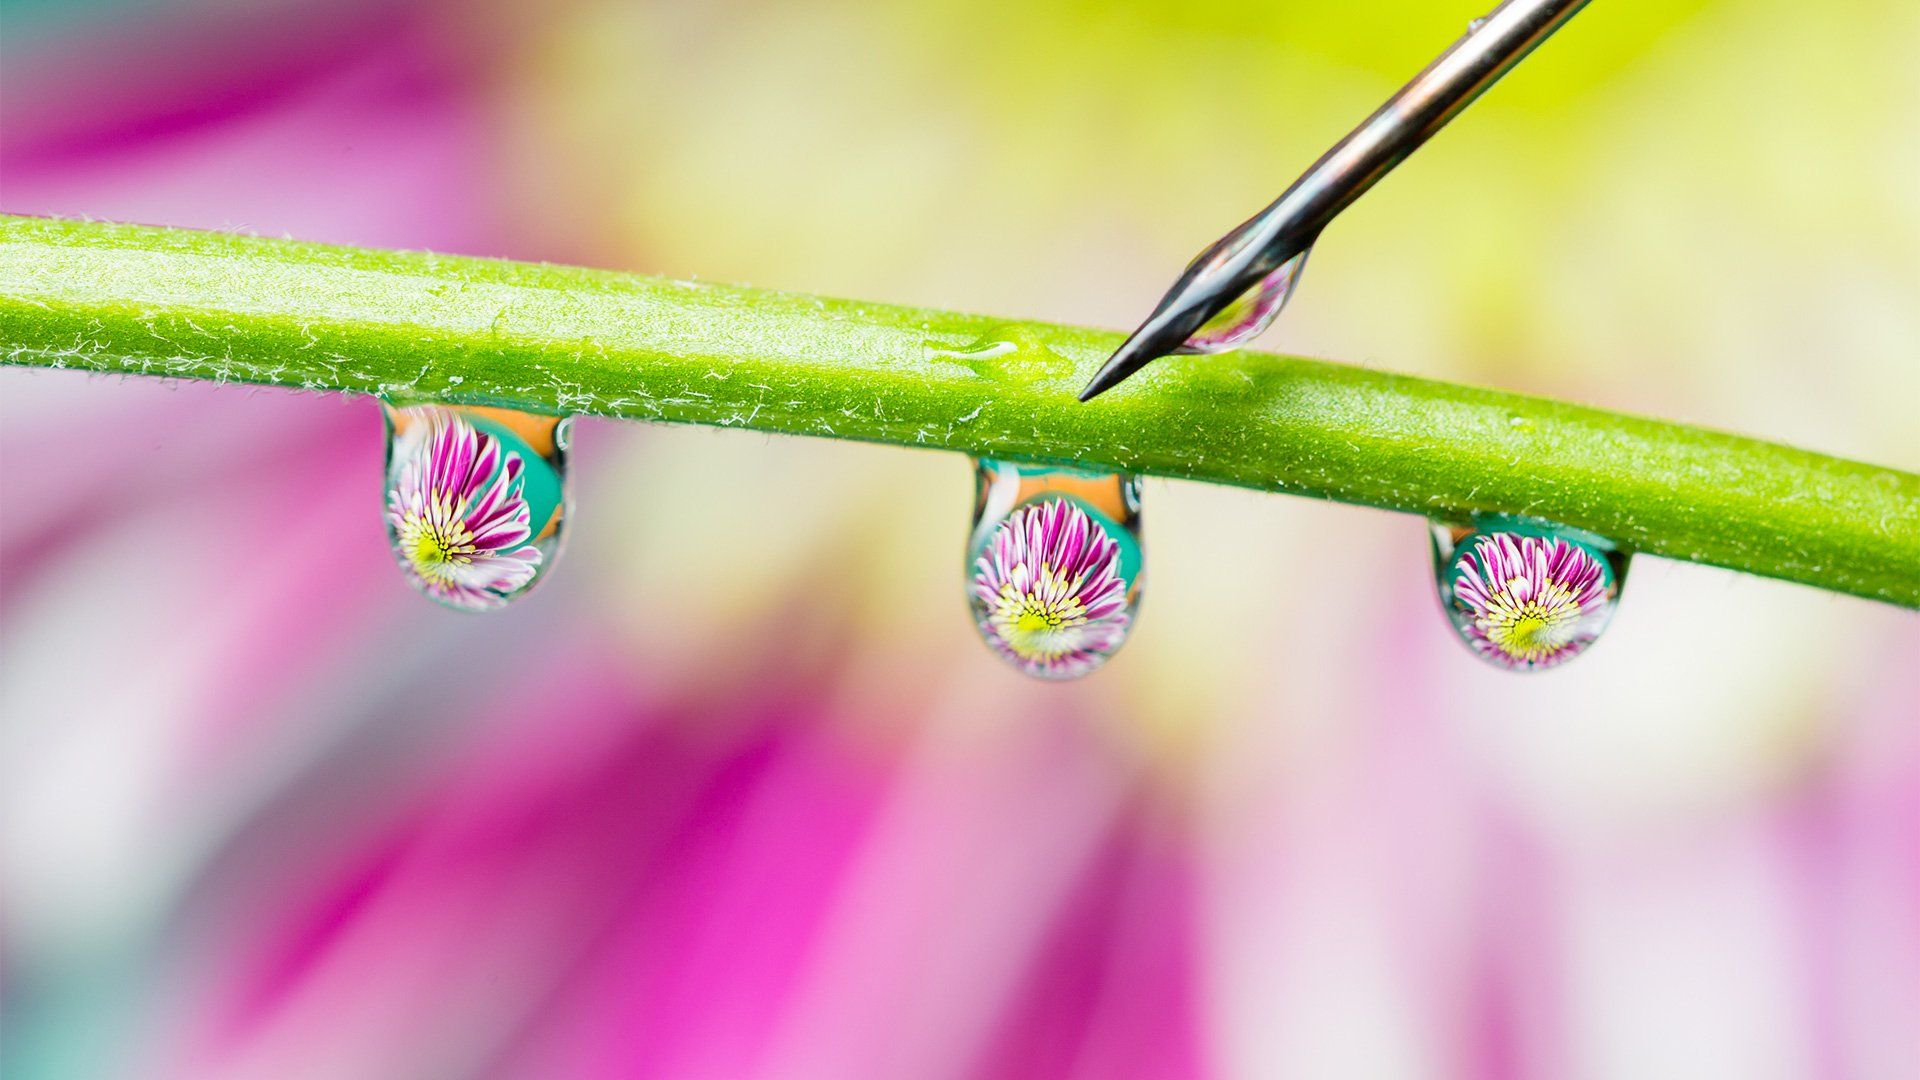 How I took a macro photo of a water droplet – SLR Photography Guide